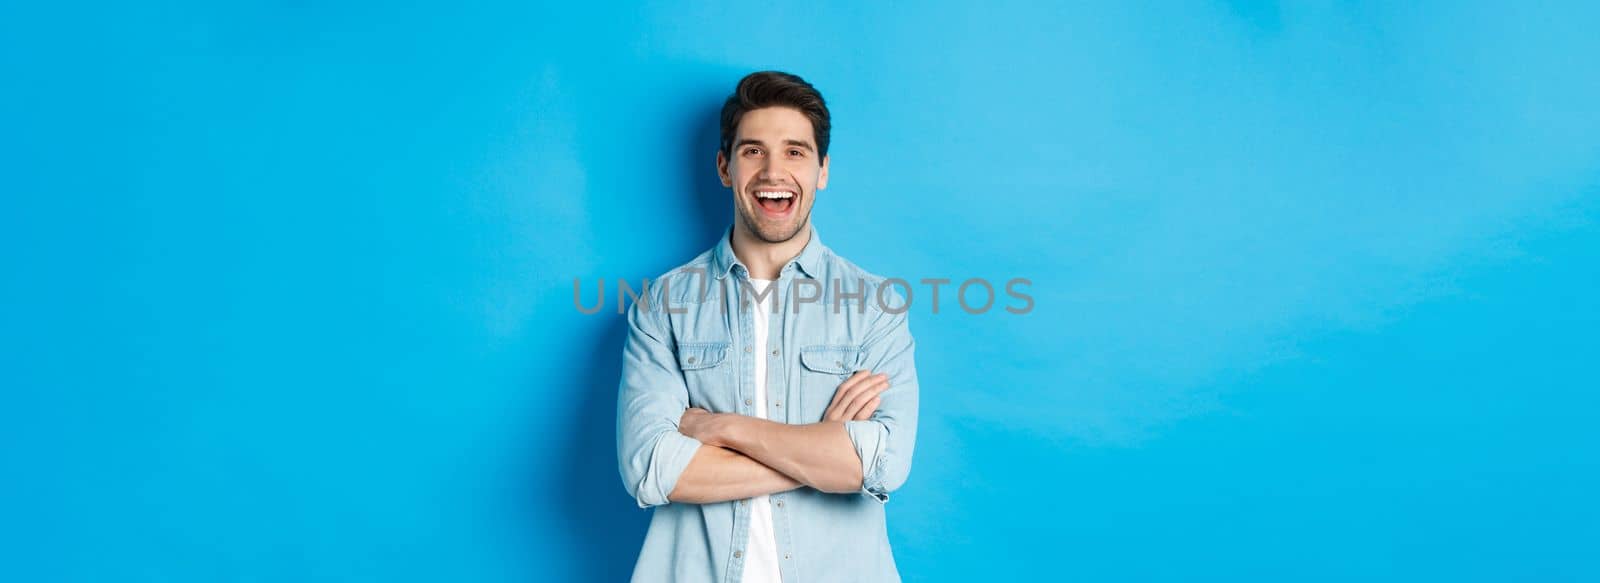 Handsome guy with beard, wearing casual outfit, laughing and looking at something funny, standing against blue background.